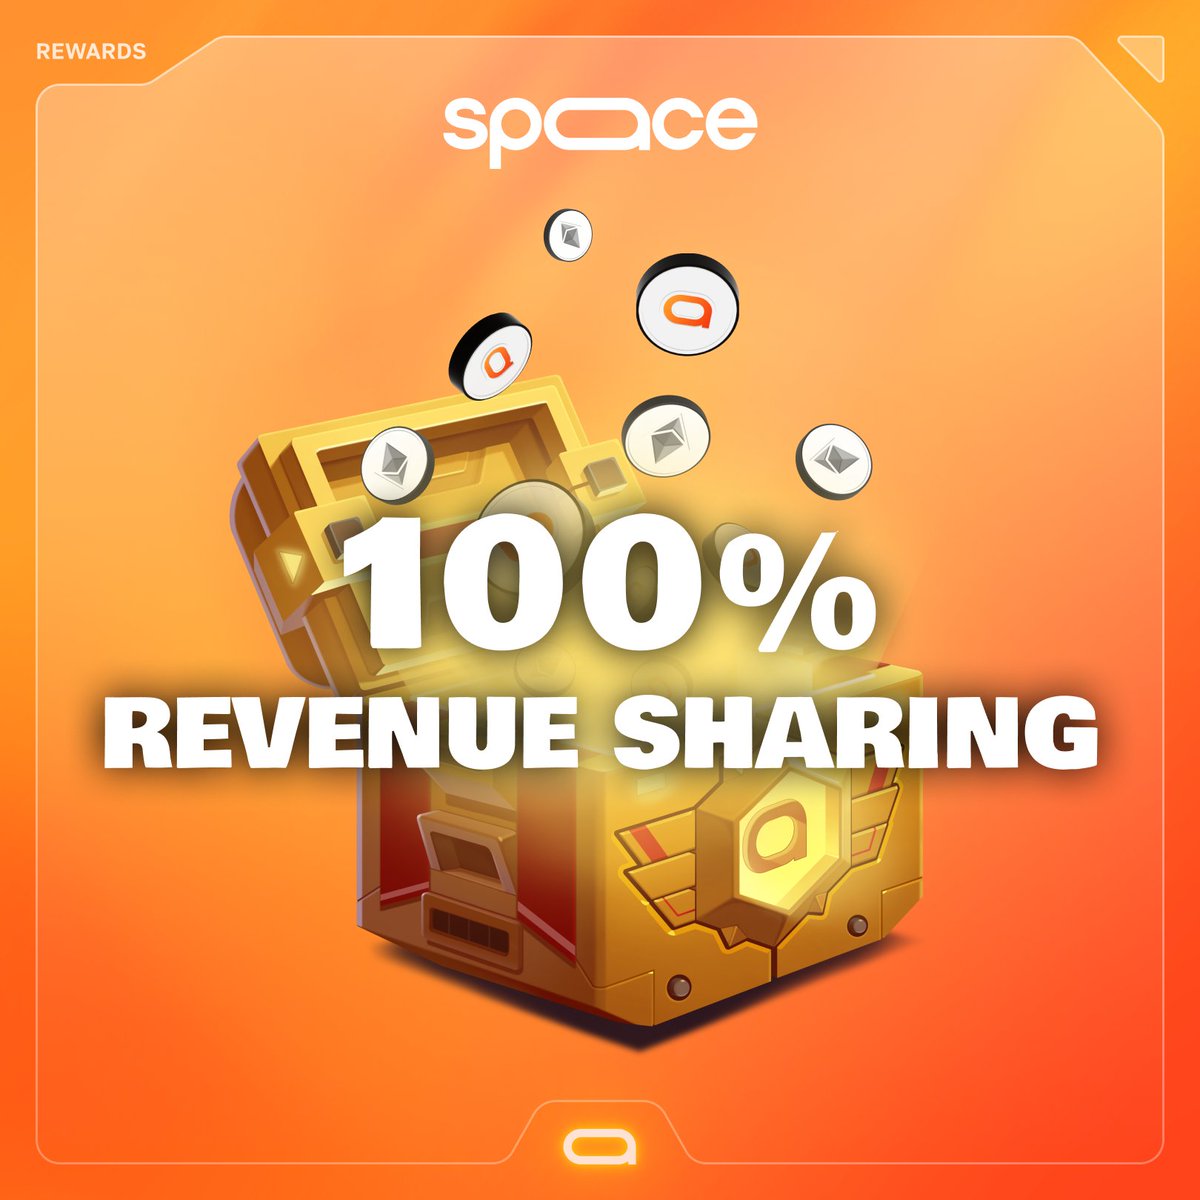 100% Revenue sharing, 100% for the community 🟠 Because it’s the only way to build together the NFT ecosystem we deserve, Spaace marketplace fees will be entirely redistributed to $SPAACE stakers. Get your share of rewards in ETH, plus additional $SPAACE tokens, every day.